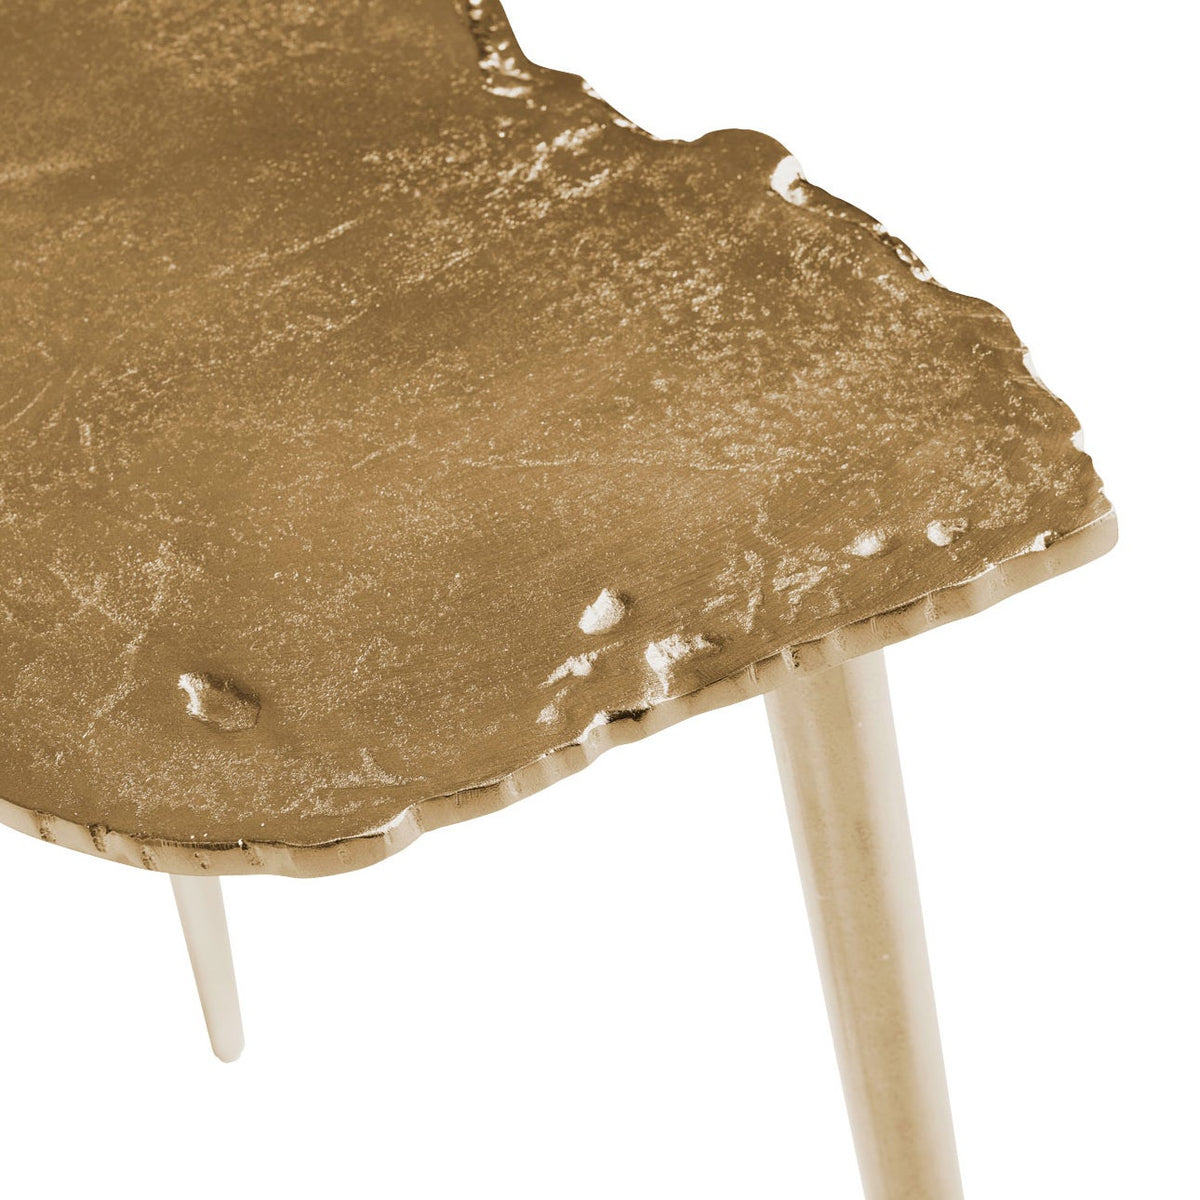 Needle Side Table by Cyan